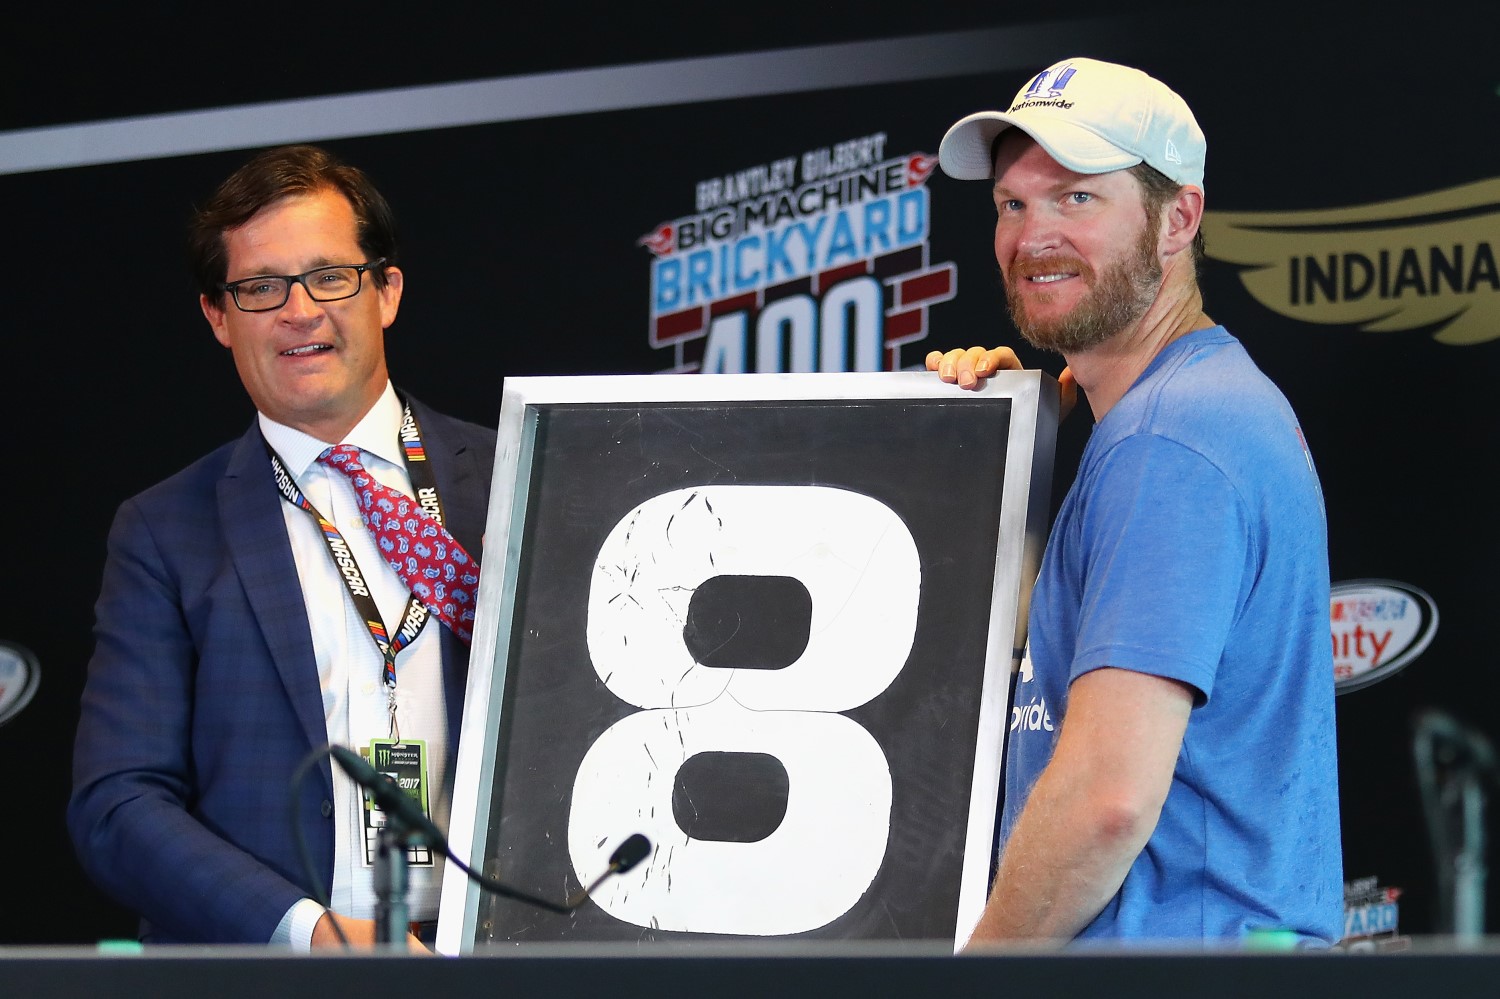 IMS President Doug Boles presents Dale Jr. with a special gift